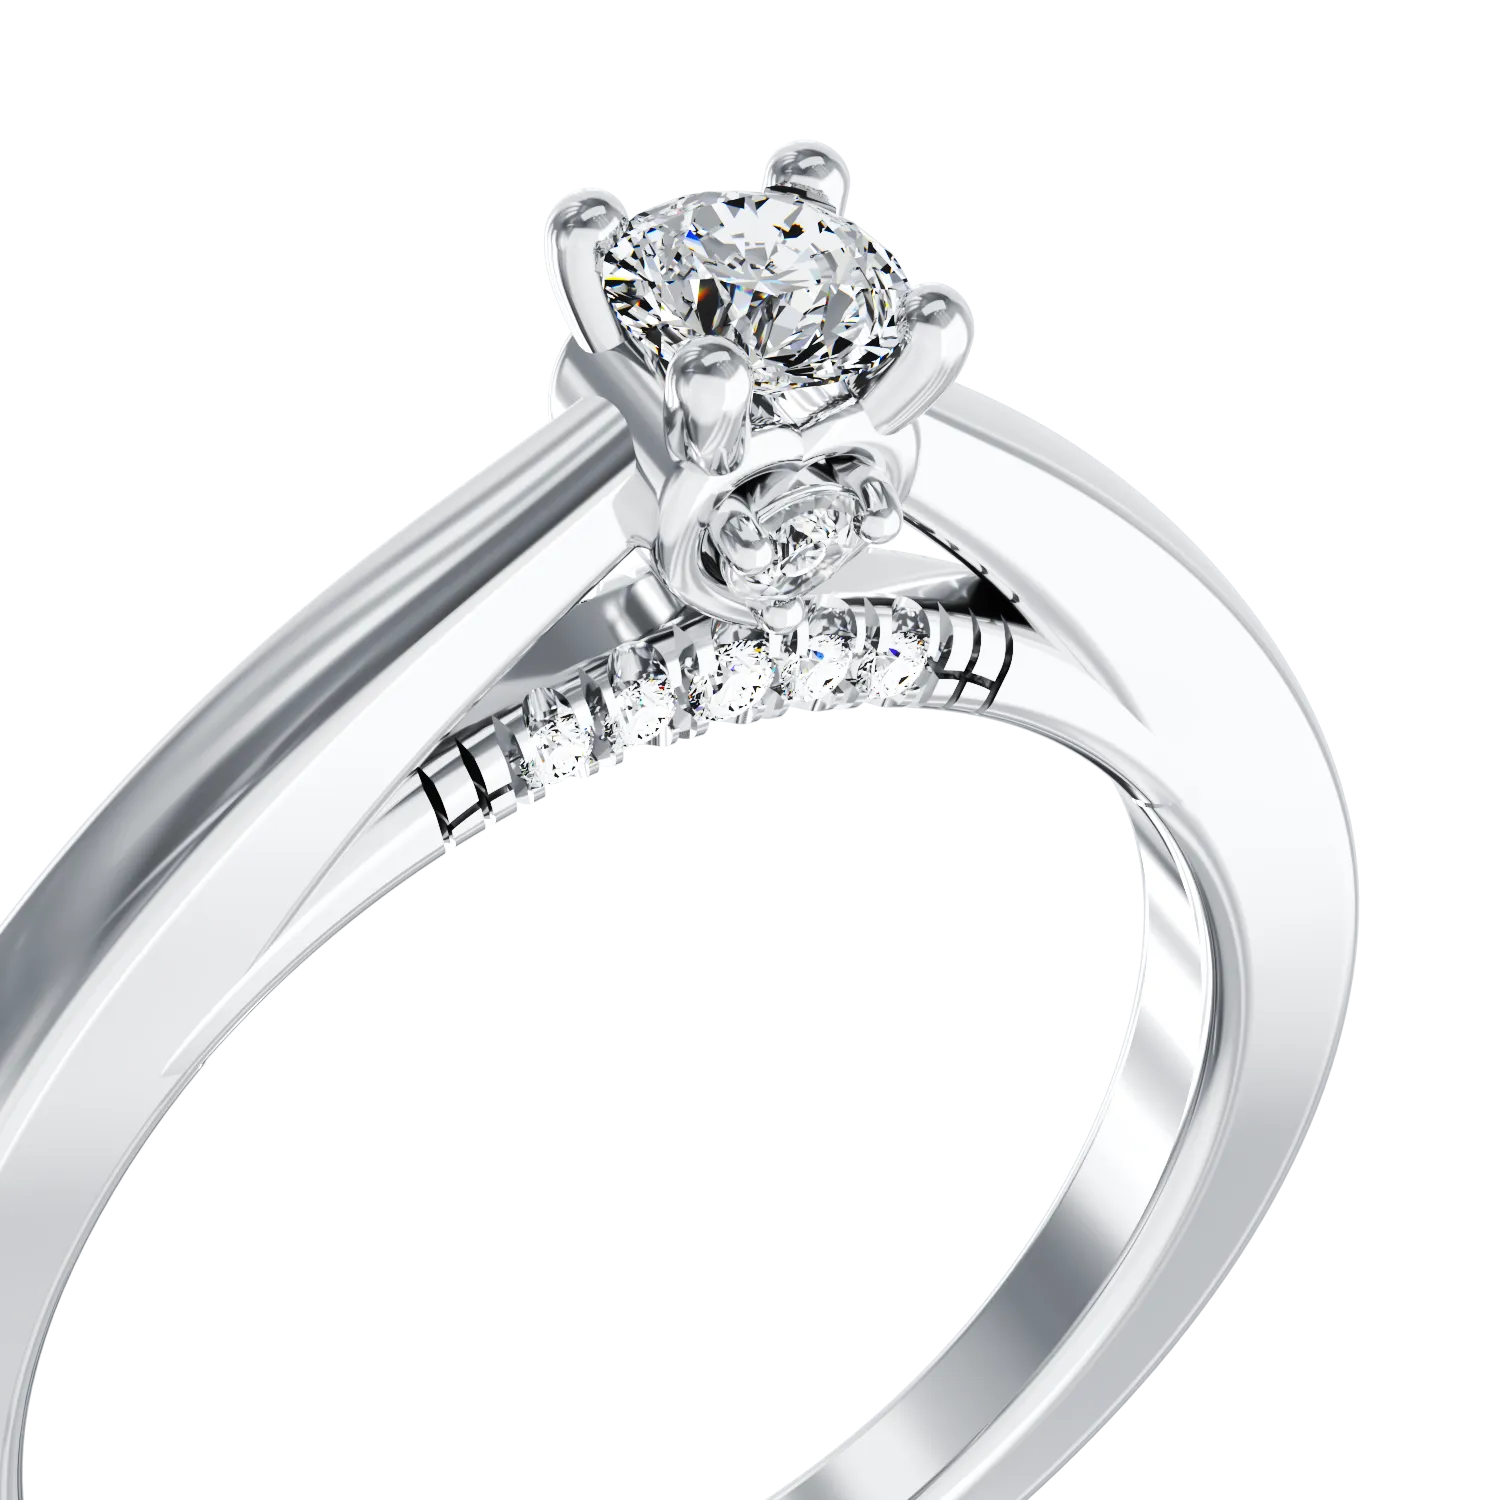 18K white gold engagement ring with 0.2ct diamond and 0.04ct diamonds